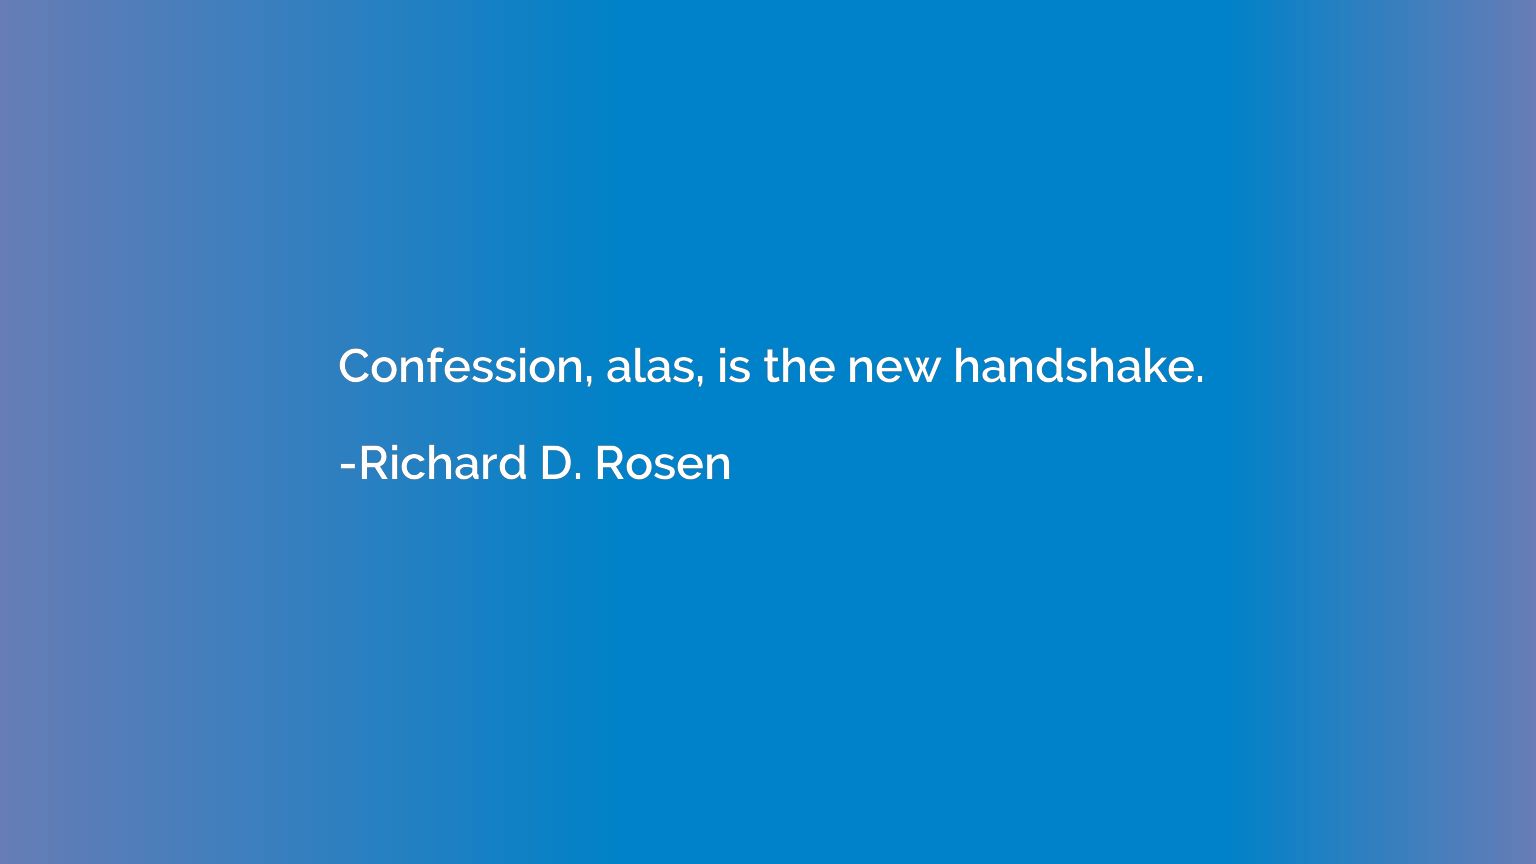 Confession, alas, is the new handshake.